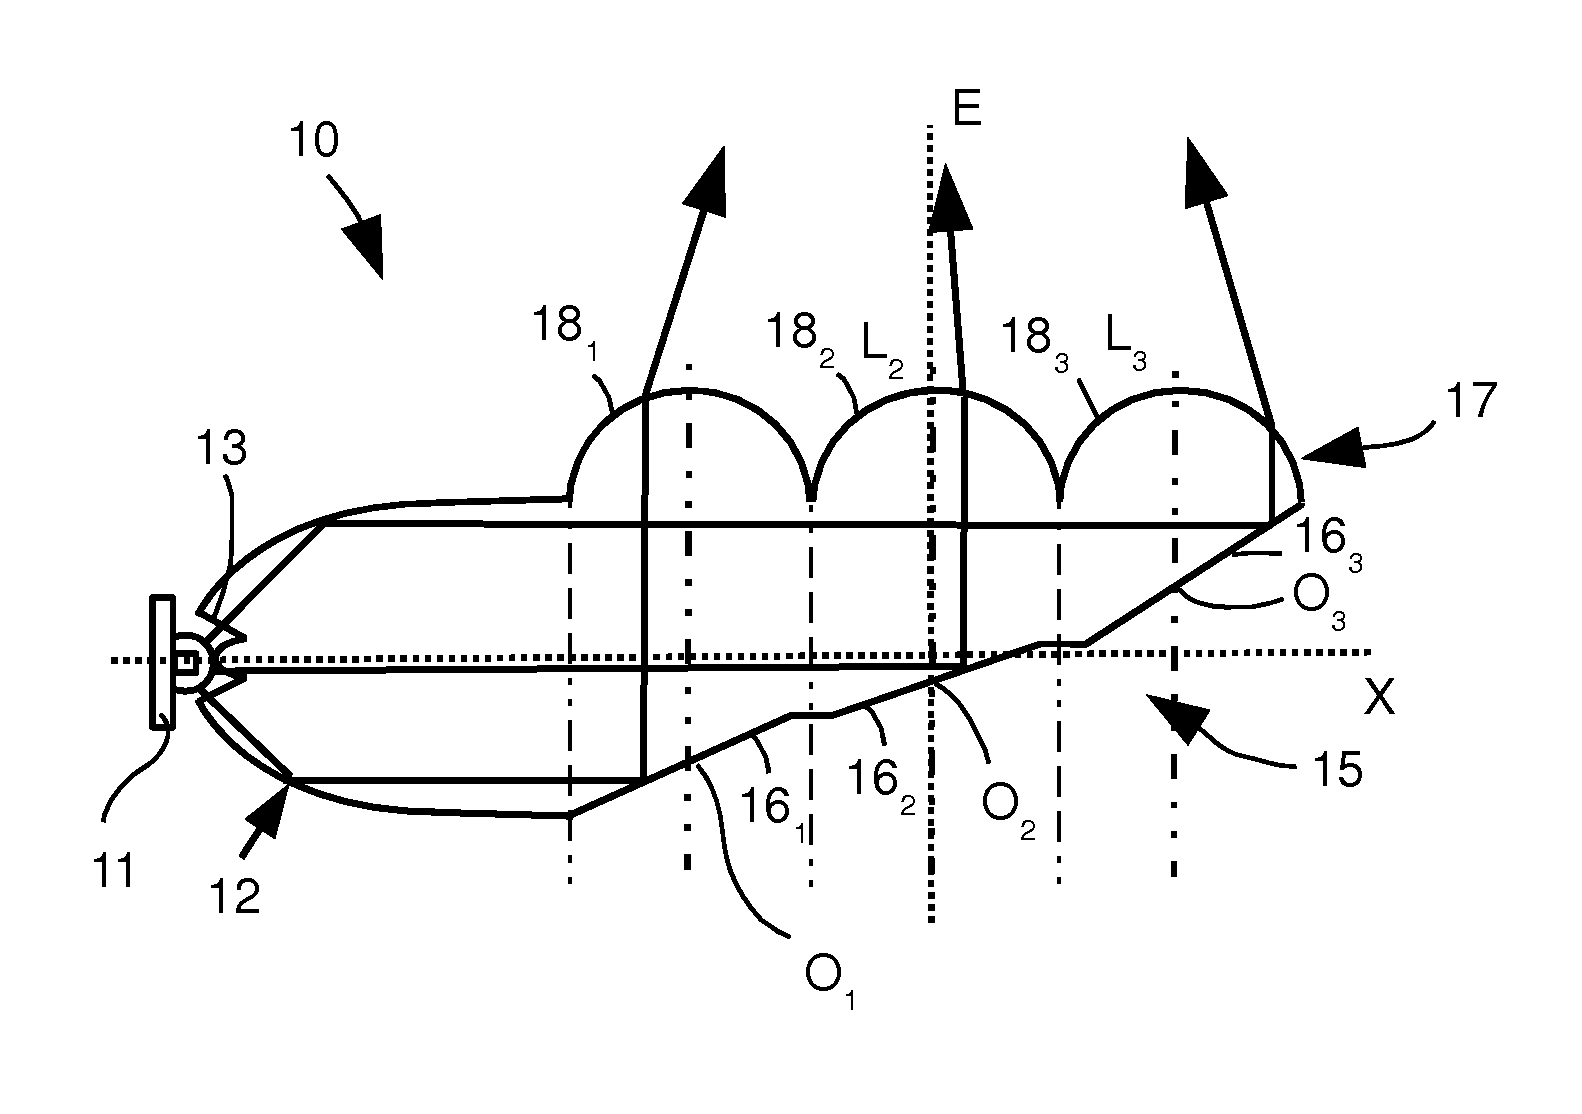 Automotive vehicle optical device having dioptric elements integrated into the light duct